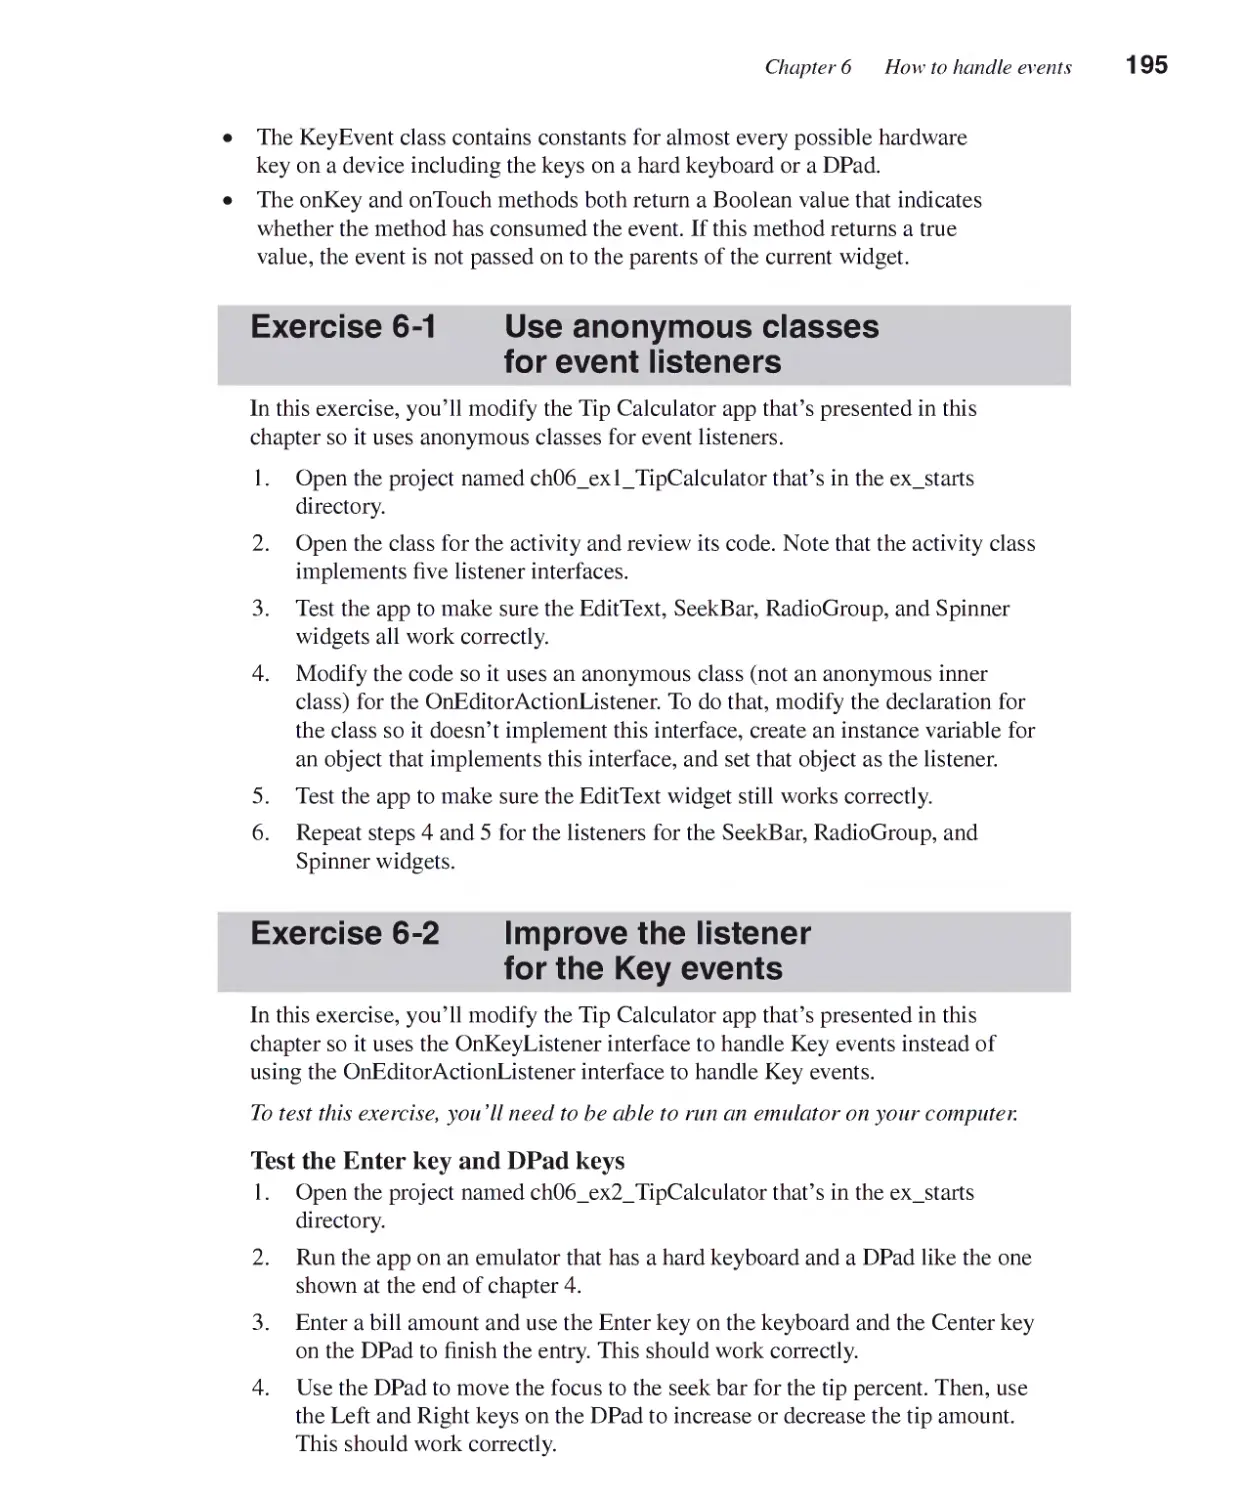 Exercise 6-1 - Use Anonymous Classes for Event Listeners
Exercise 6-2 - Improve the Listener for the Key Events